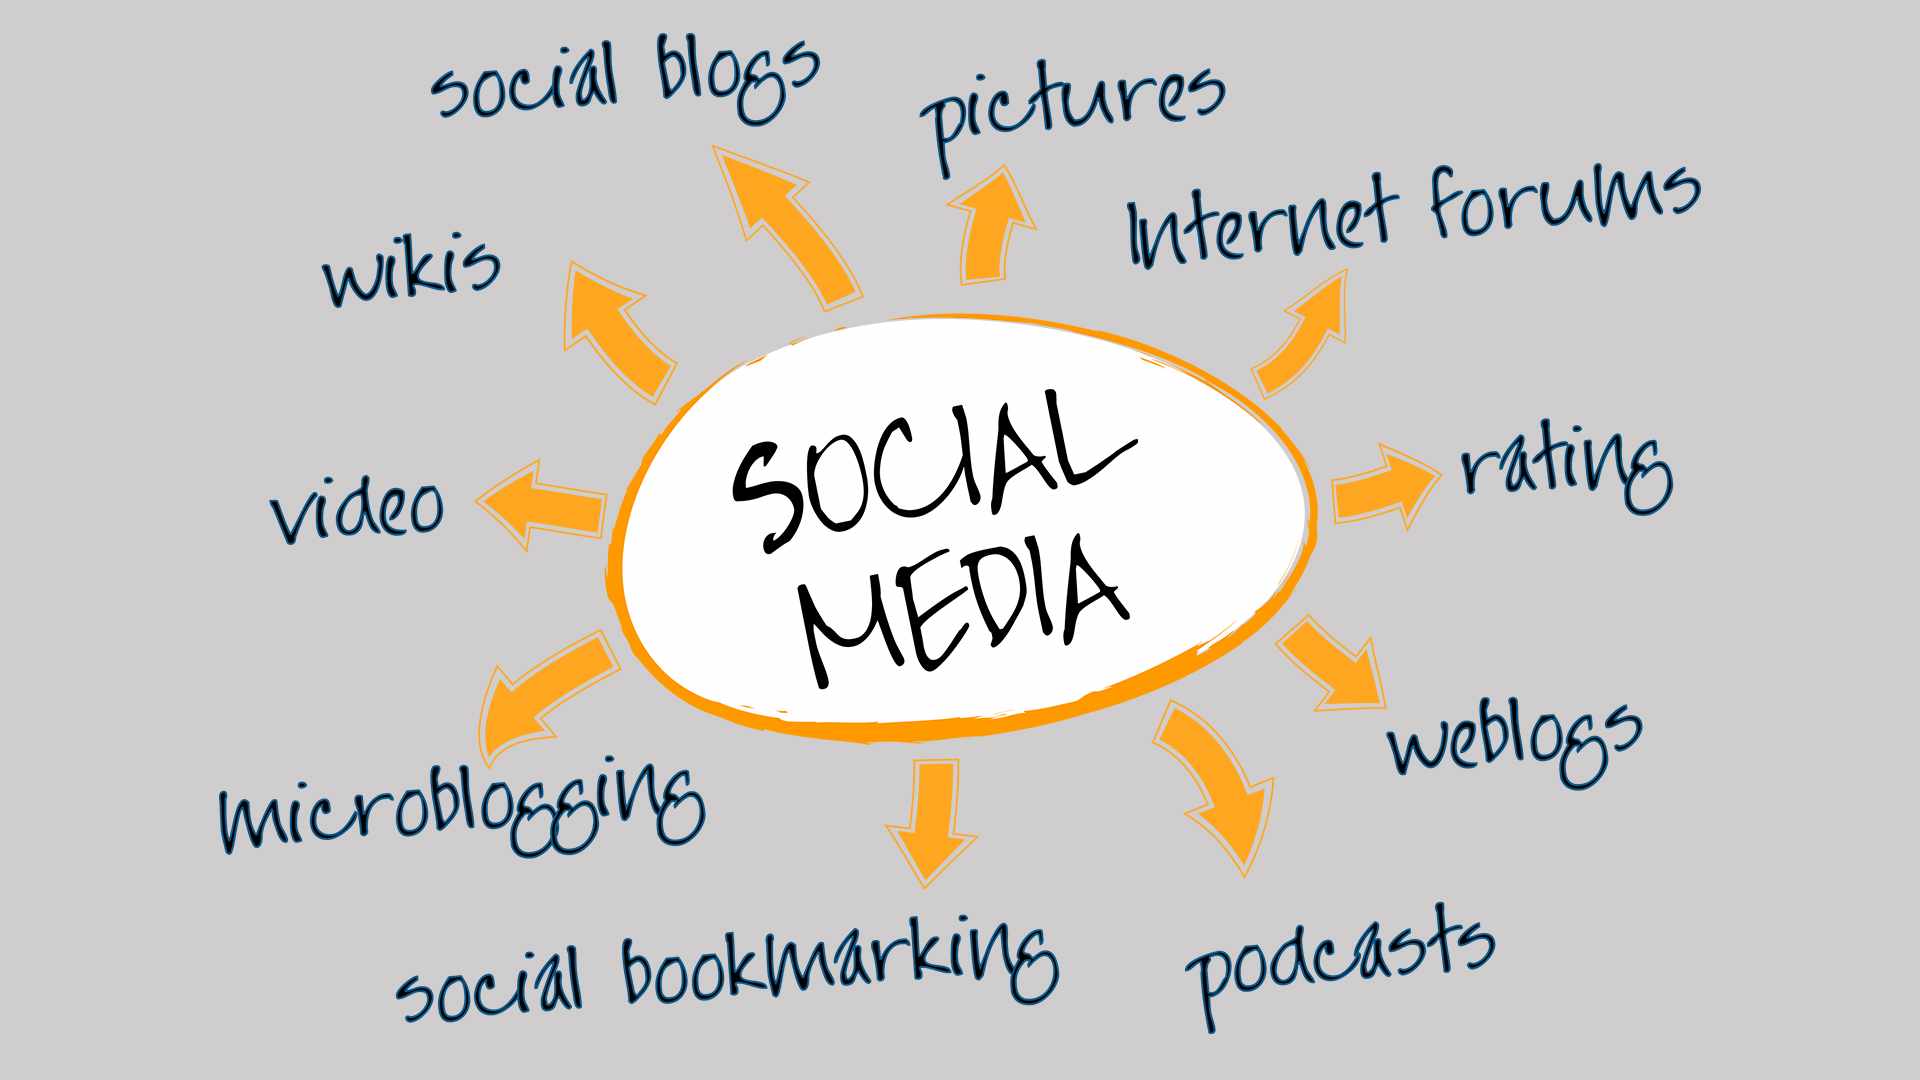 How to Build a Successful Social Media Marketing Plan